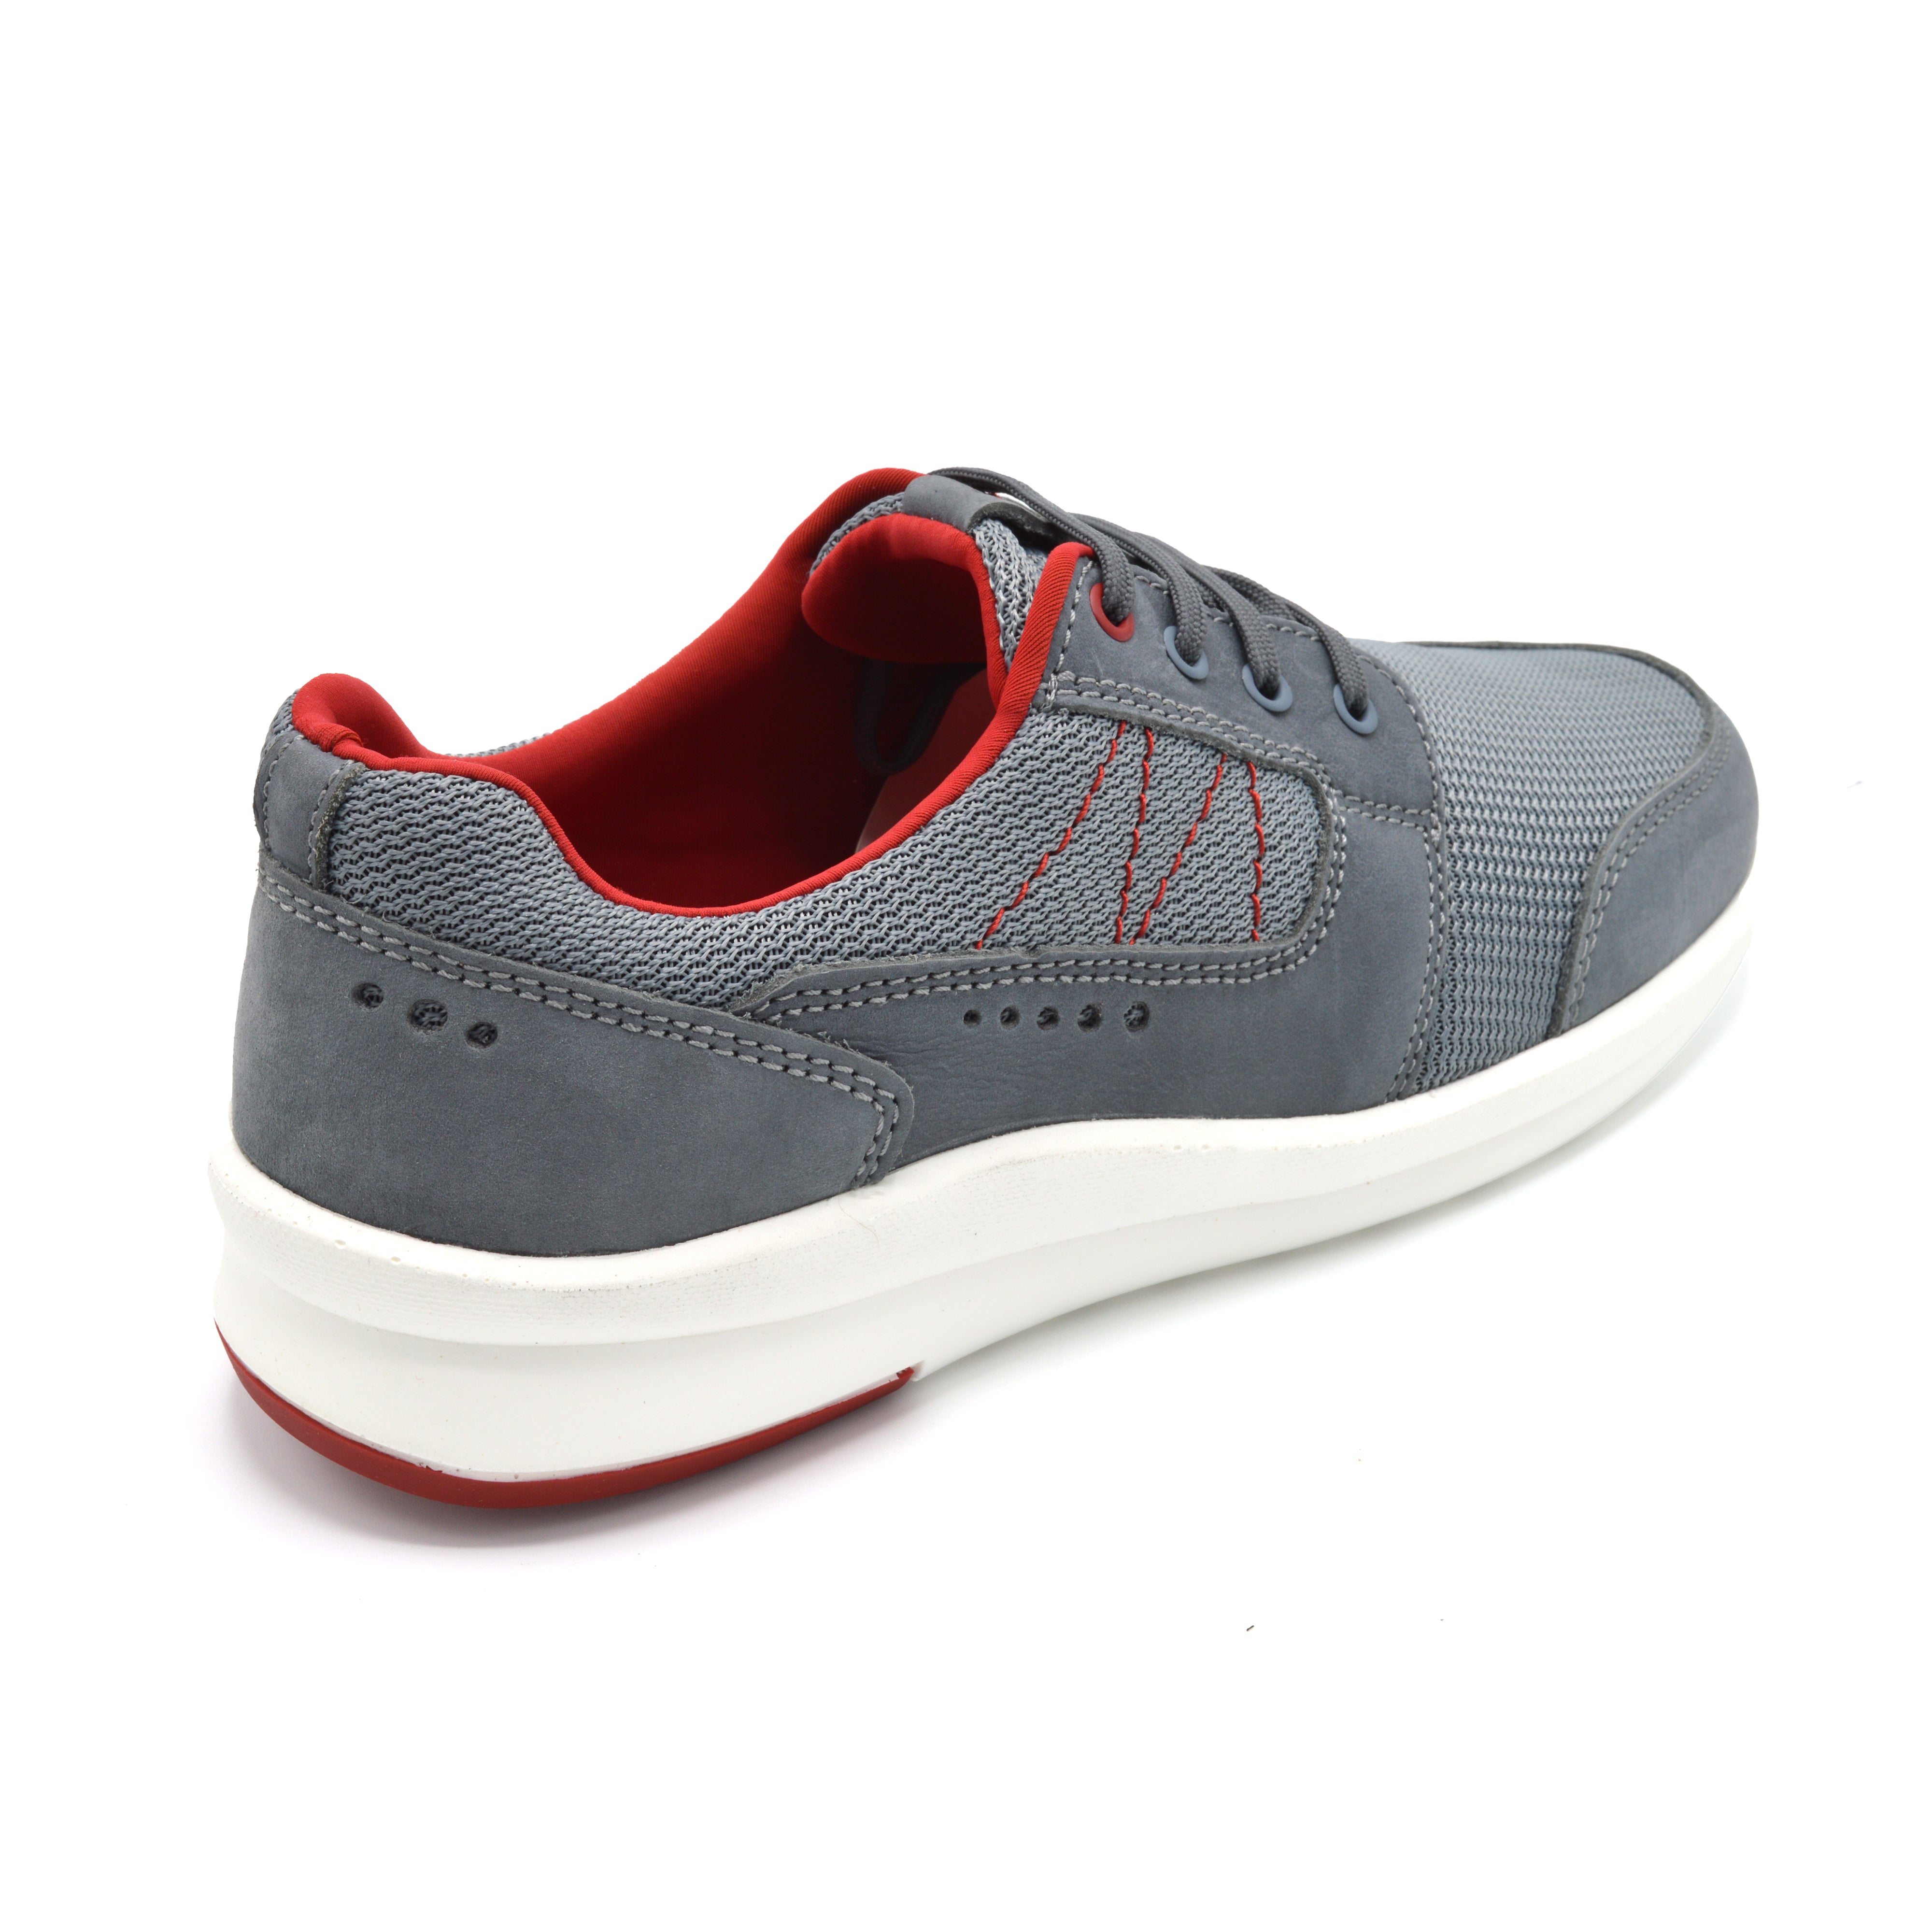 Cosyfeet Vasco- Mens Extra Wide Fit Trainer - 6E Fitting Grey